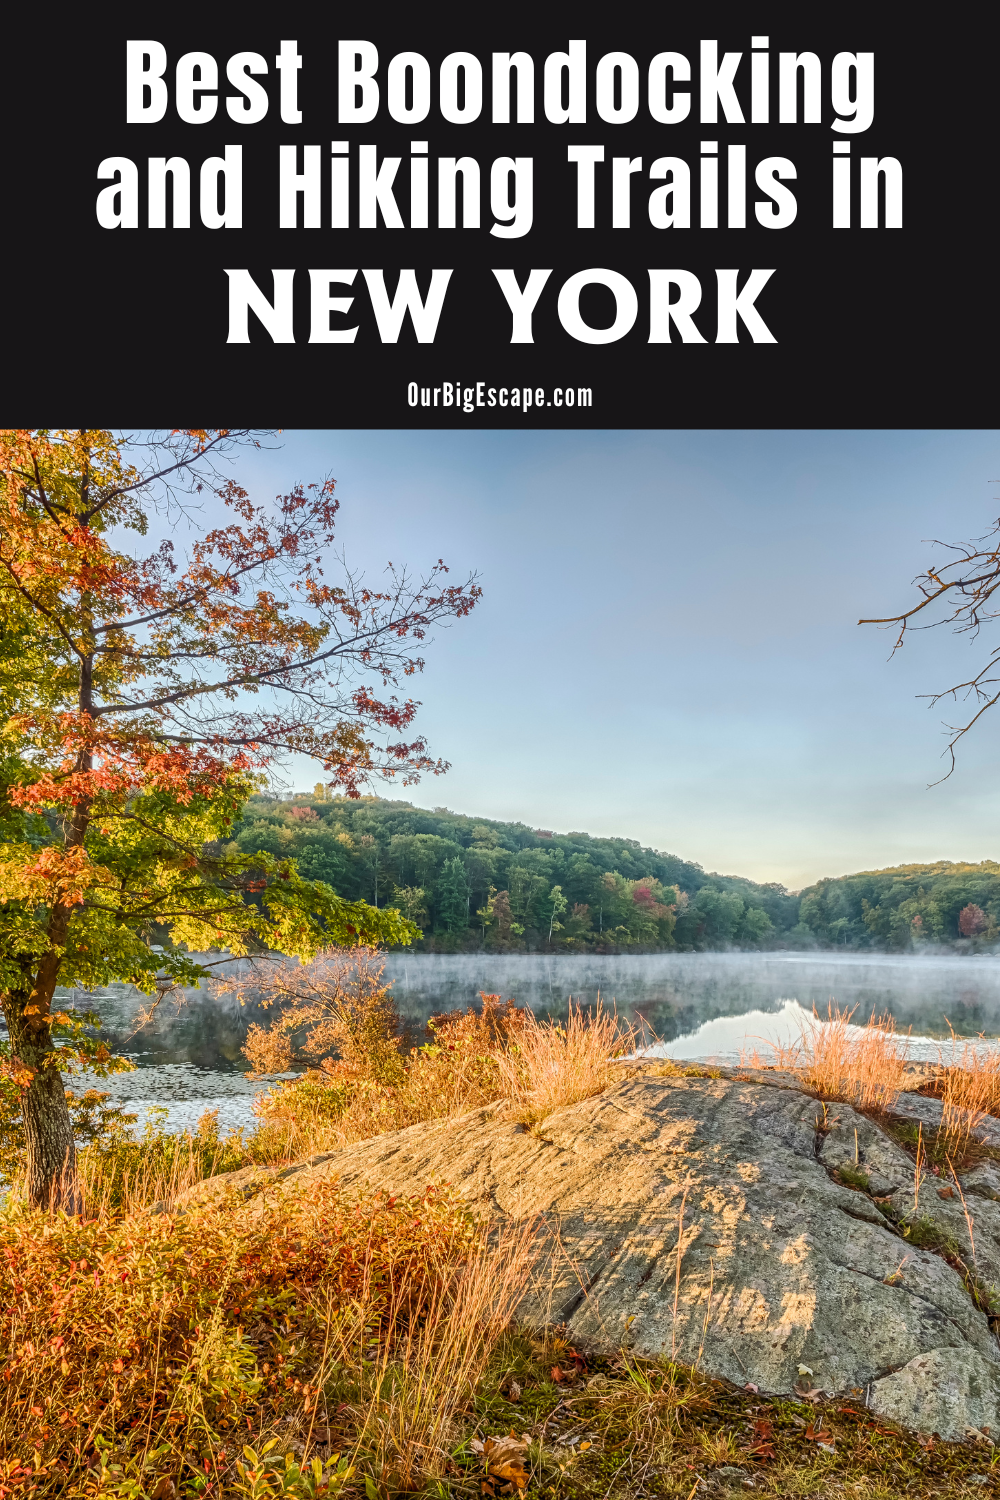 Best Boondocking and Hiking Trails in New York